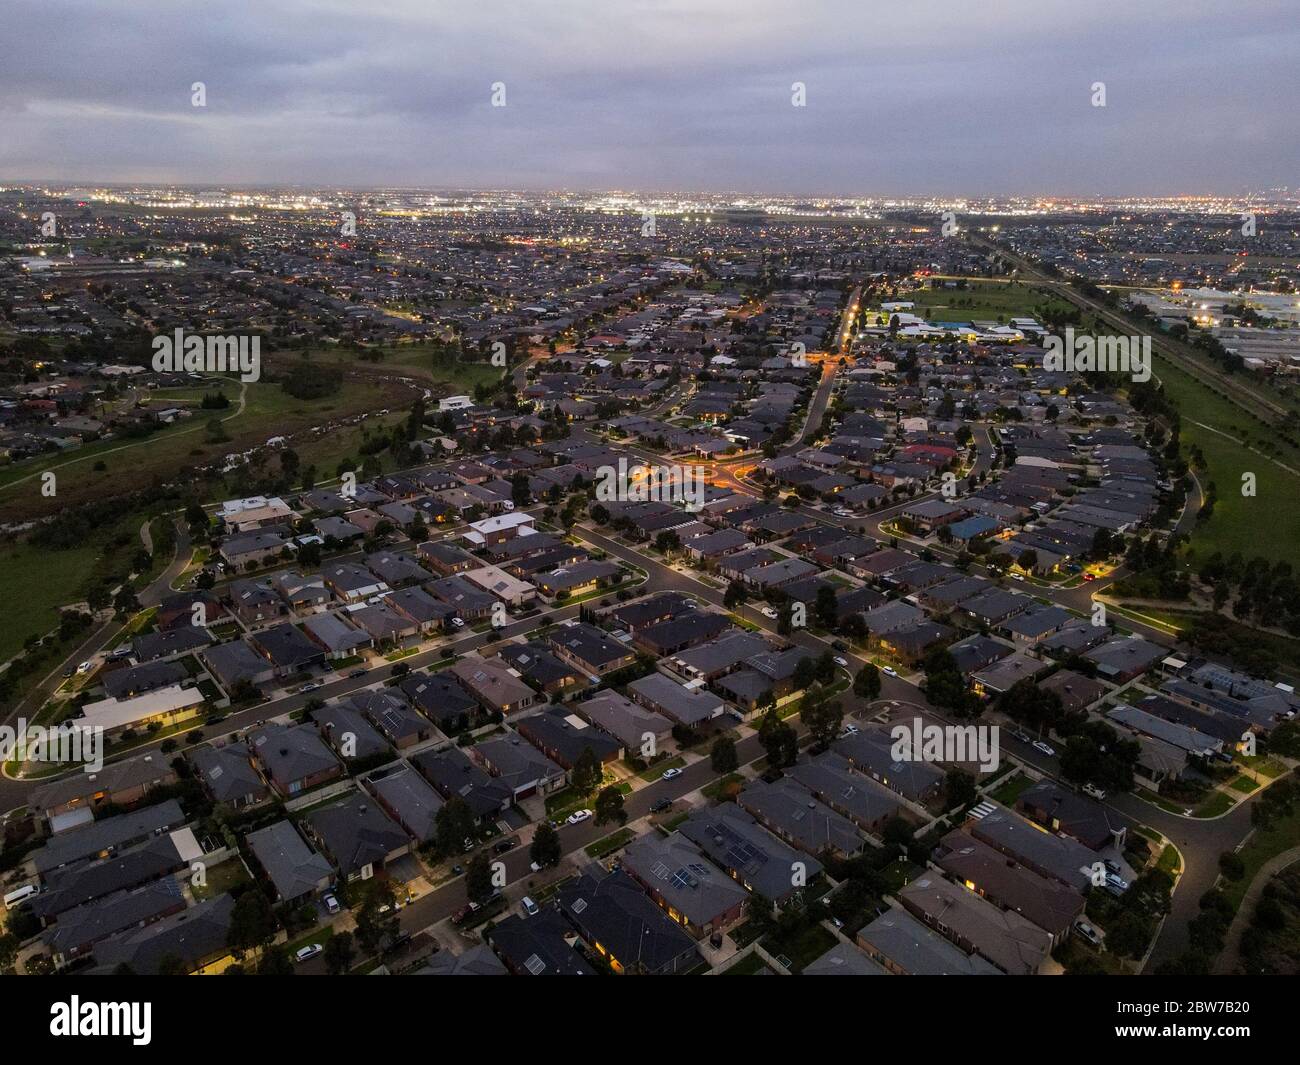 Aerial view of new homes built in new suburbs urban sprawl government rebates in evening with parkland and city lights Melbourne Victoria Australia Stock Photo